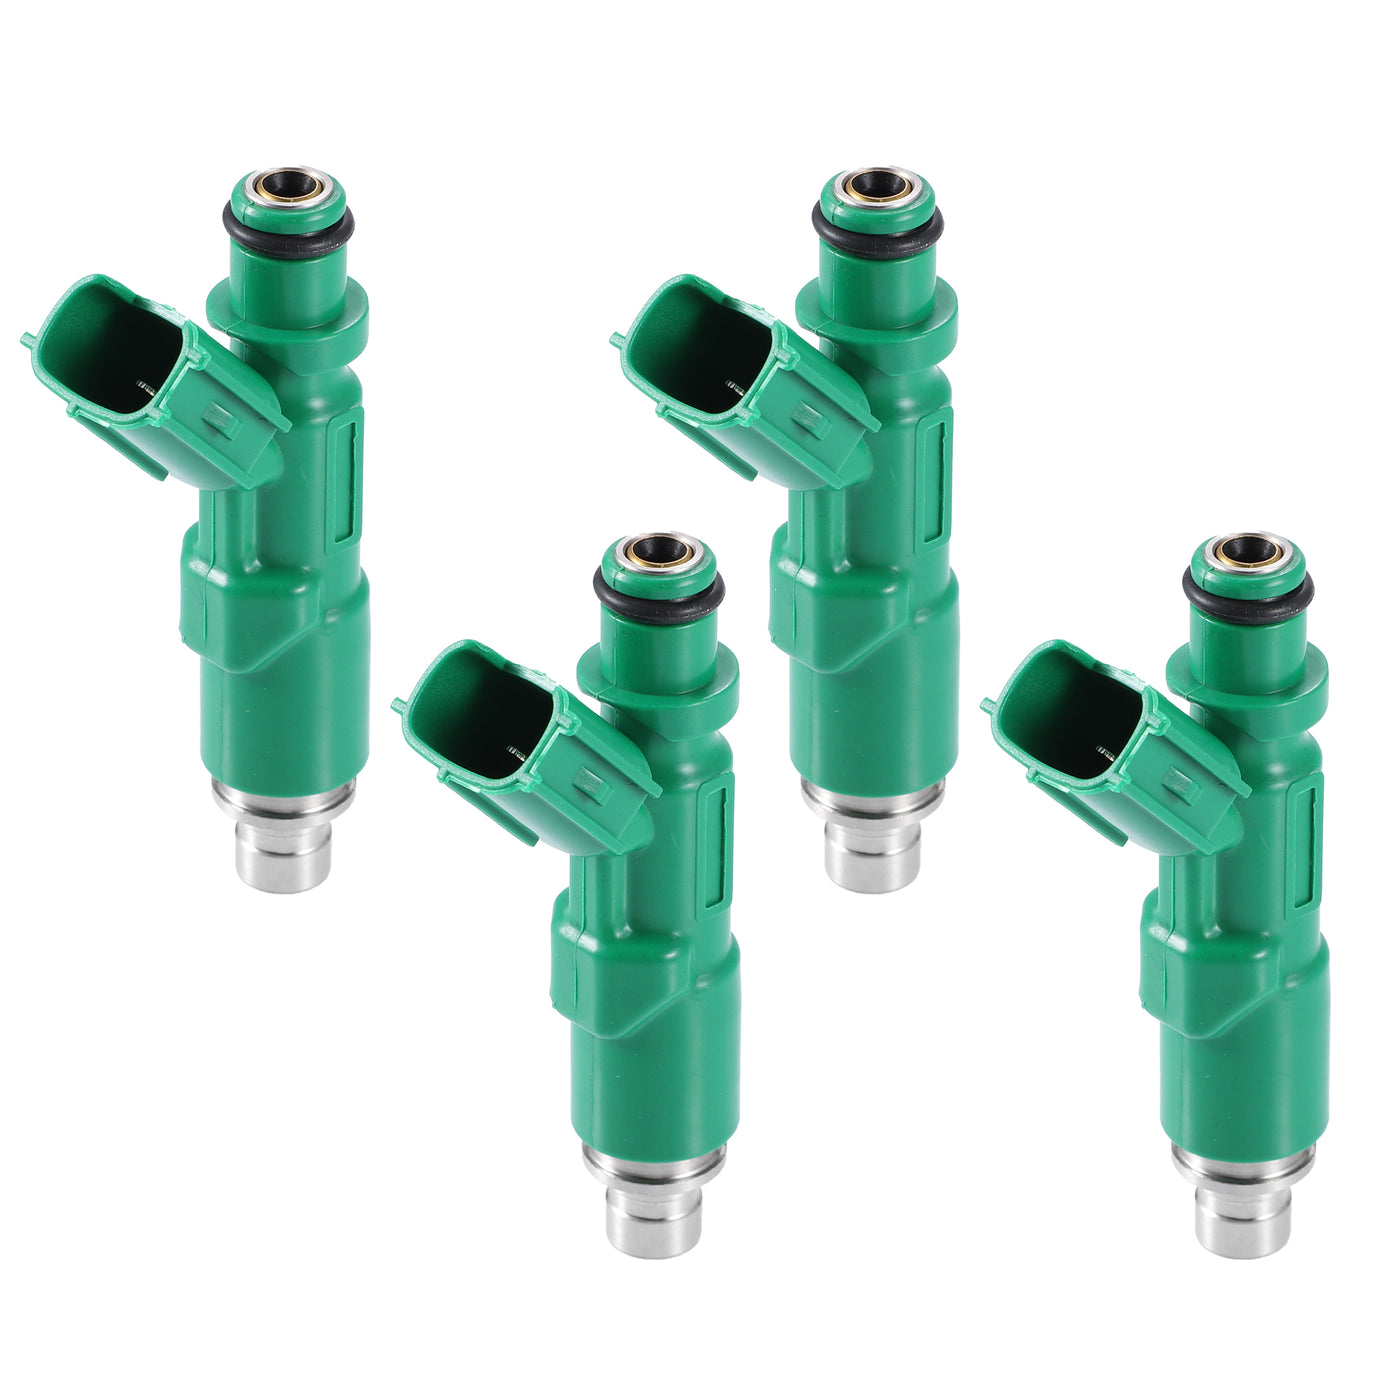 X AUTOHAUX 4pcs 23209-21020 Car Fuel Injector for Toyota Echo 2000-2005 for Toyota Prius 1.5L 2003-2009 for Scion xA xB 2004-2006